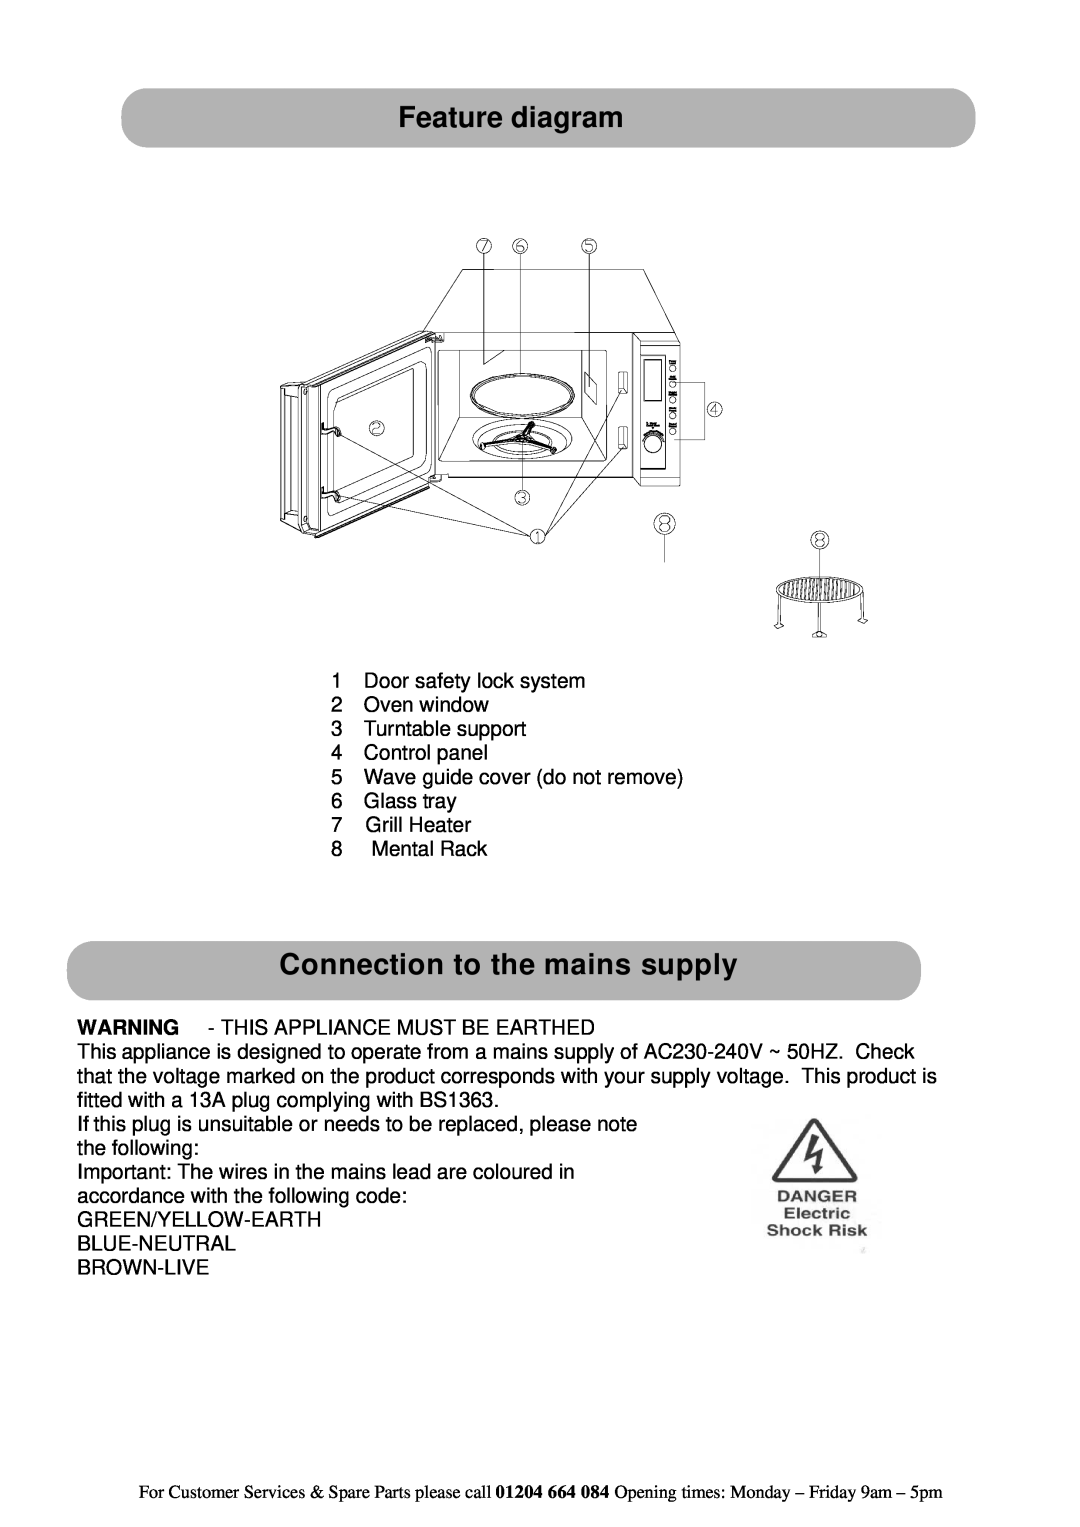 Russell Hobbs RHM2030 instruction manual Feature diagram, Connection to the mains supply 